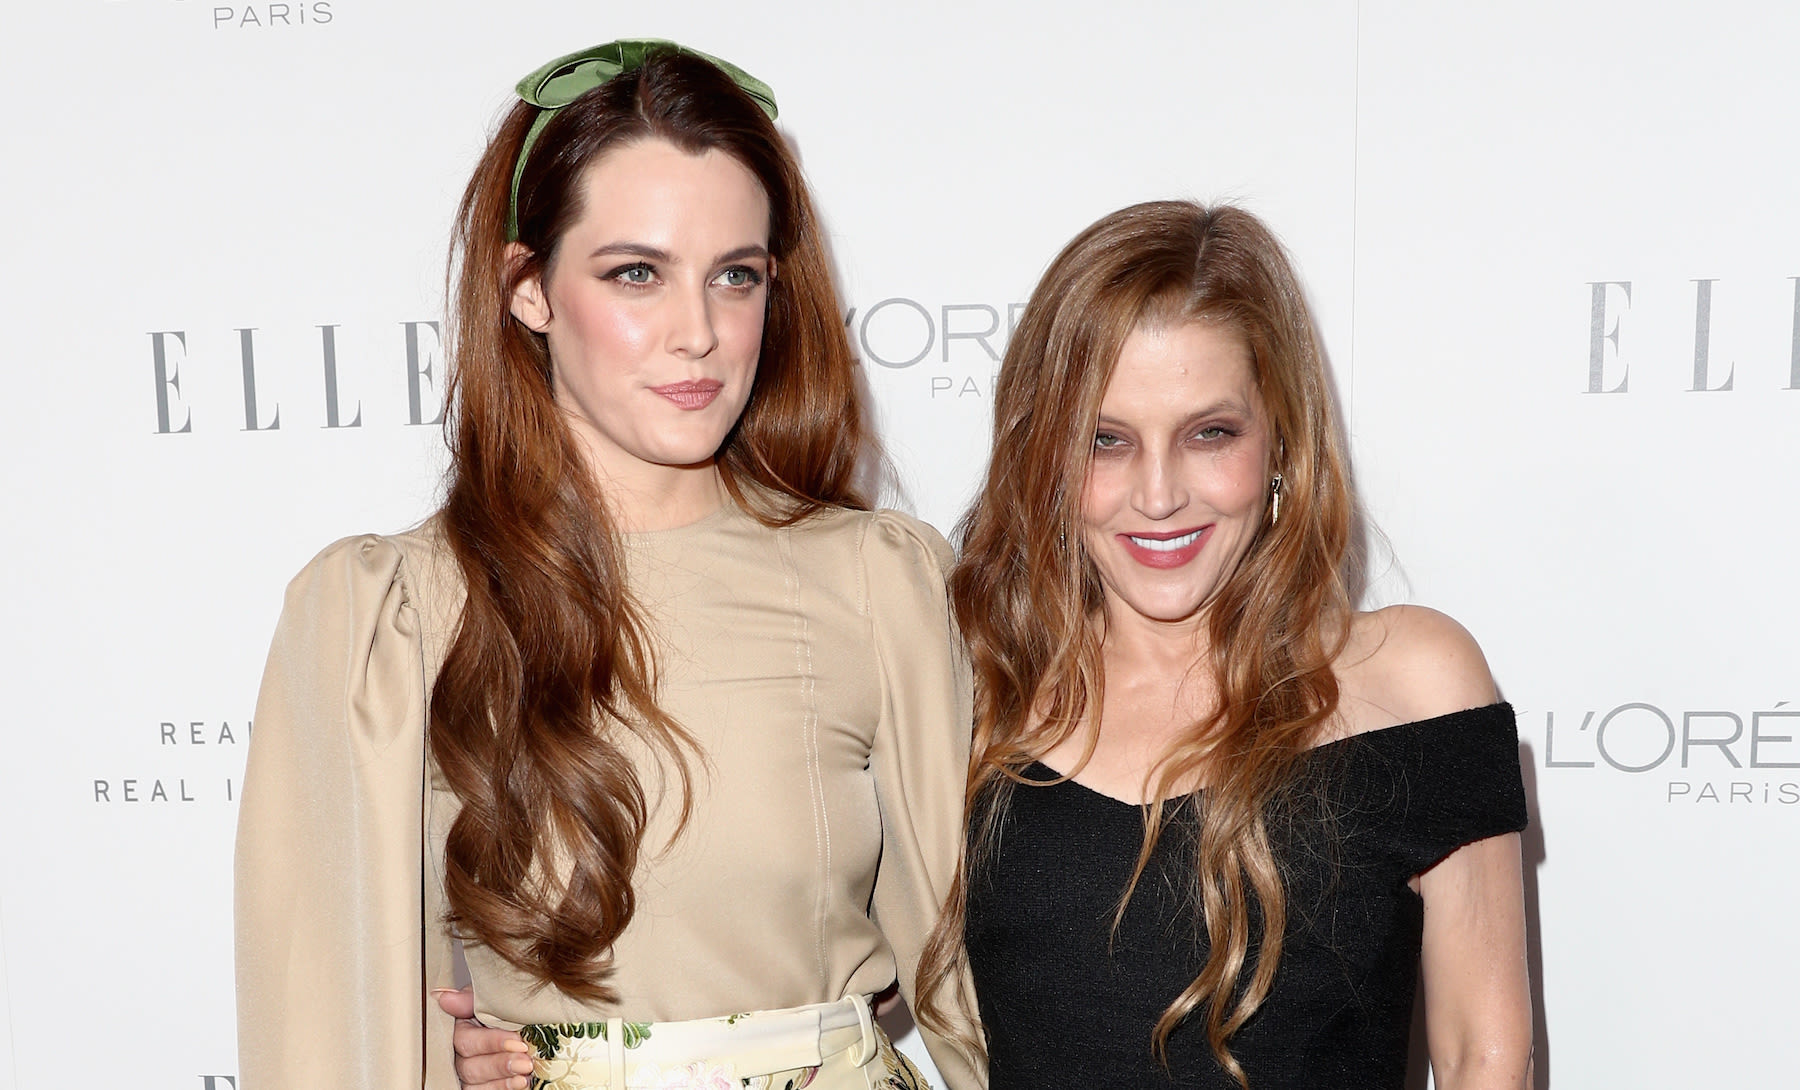 Lisa Marie Presley’s Memoir, Co-Written by Riley Keough, Out This Fall